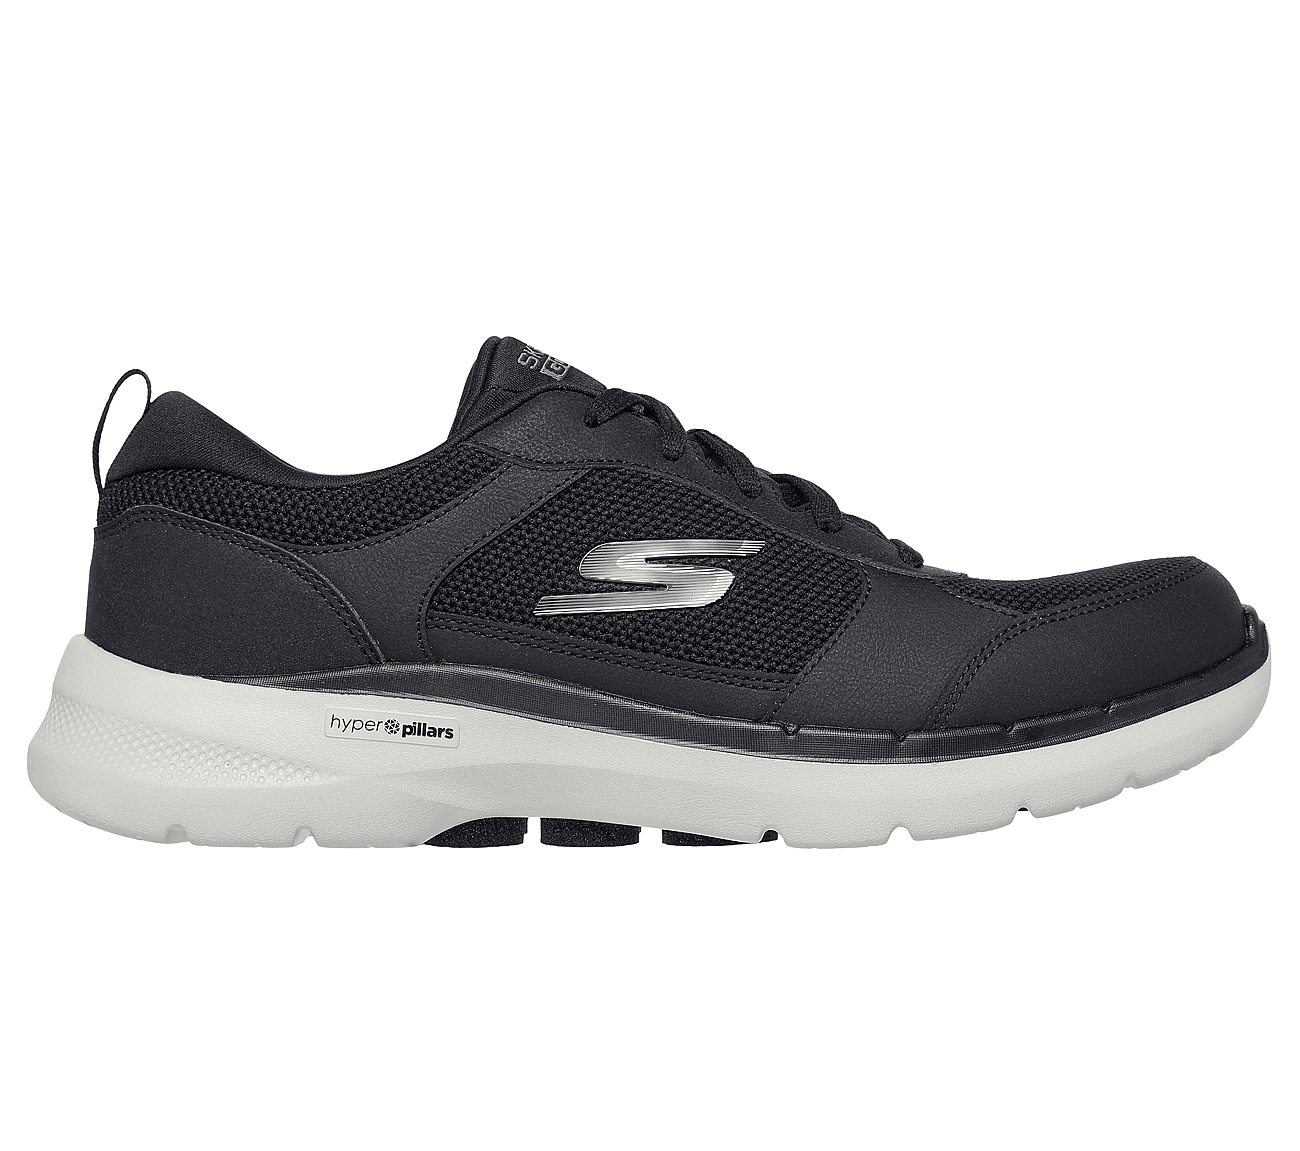 Skechers Black/Grey Go Walk 6 Compete Mens Lace Up Shoes - Style ID ...